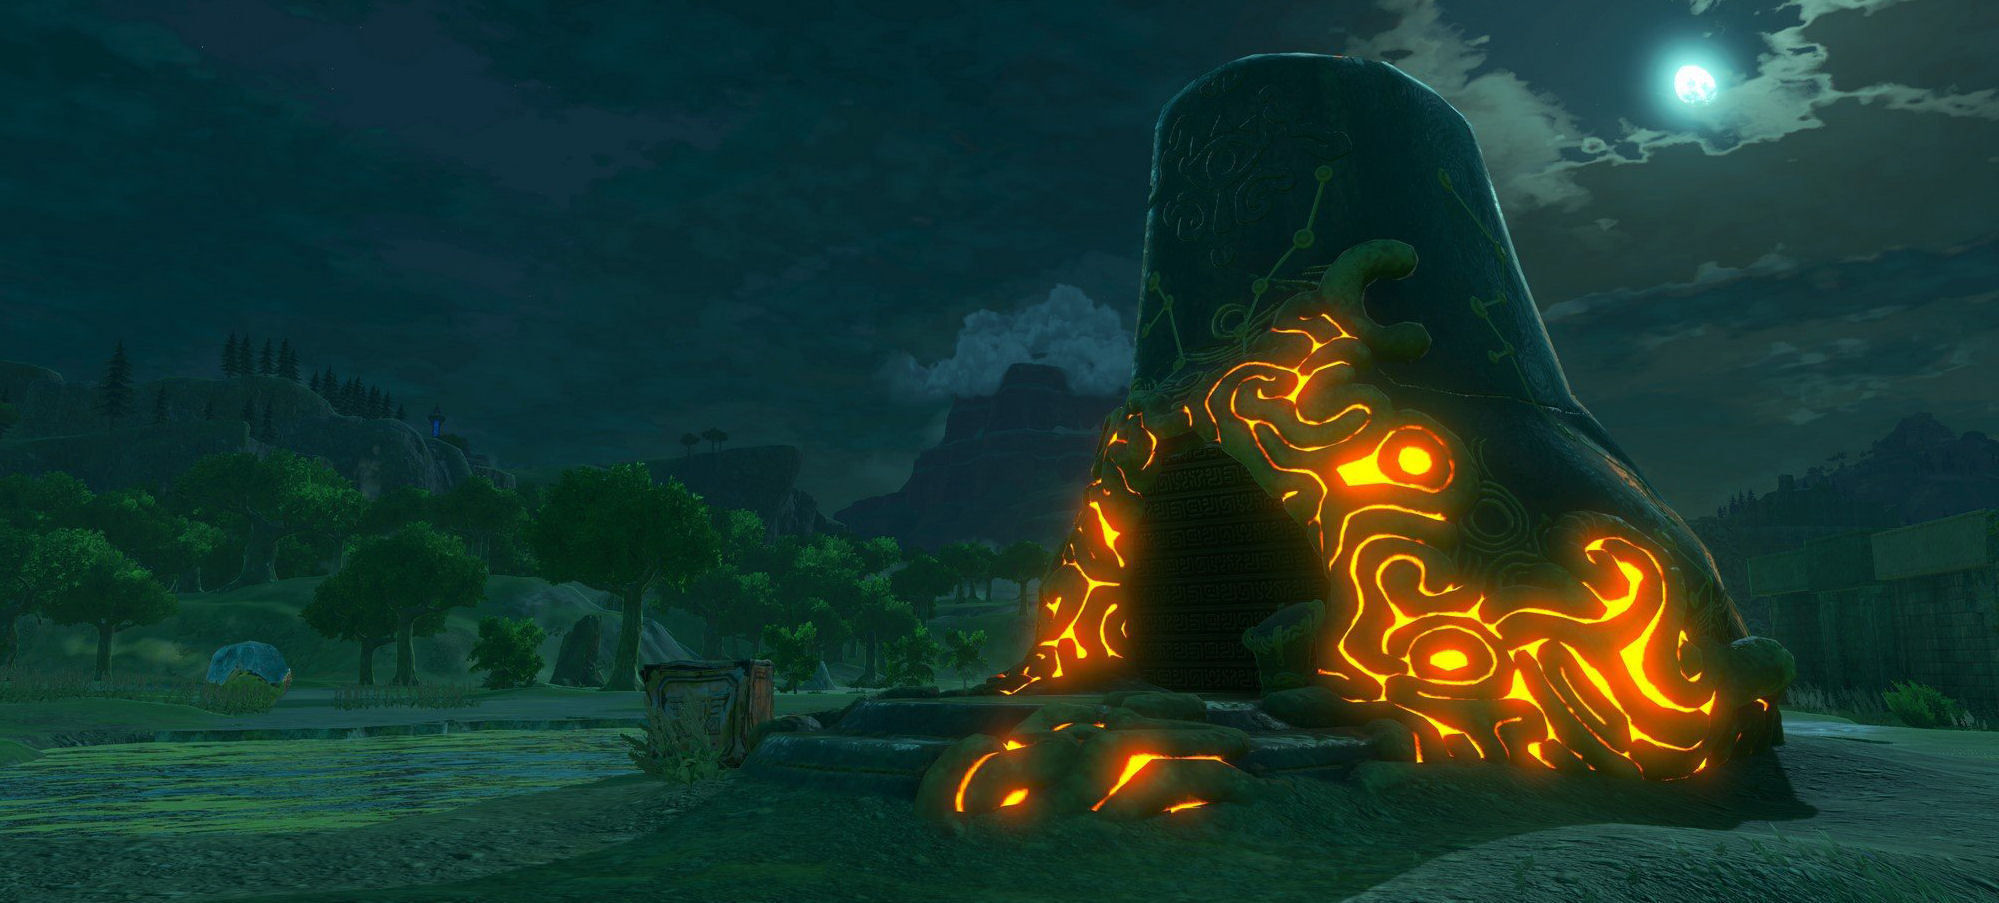 legend of zelda breath of the wild location of all shrines